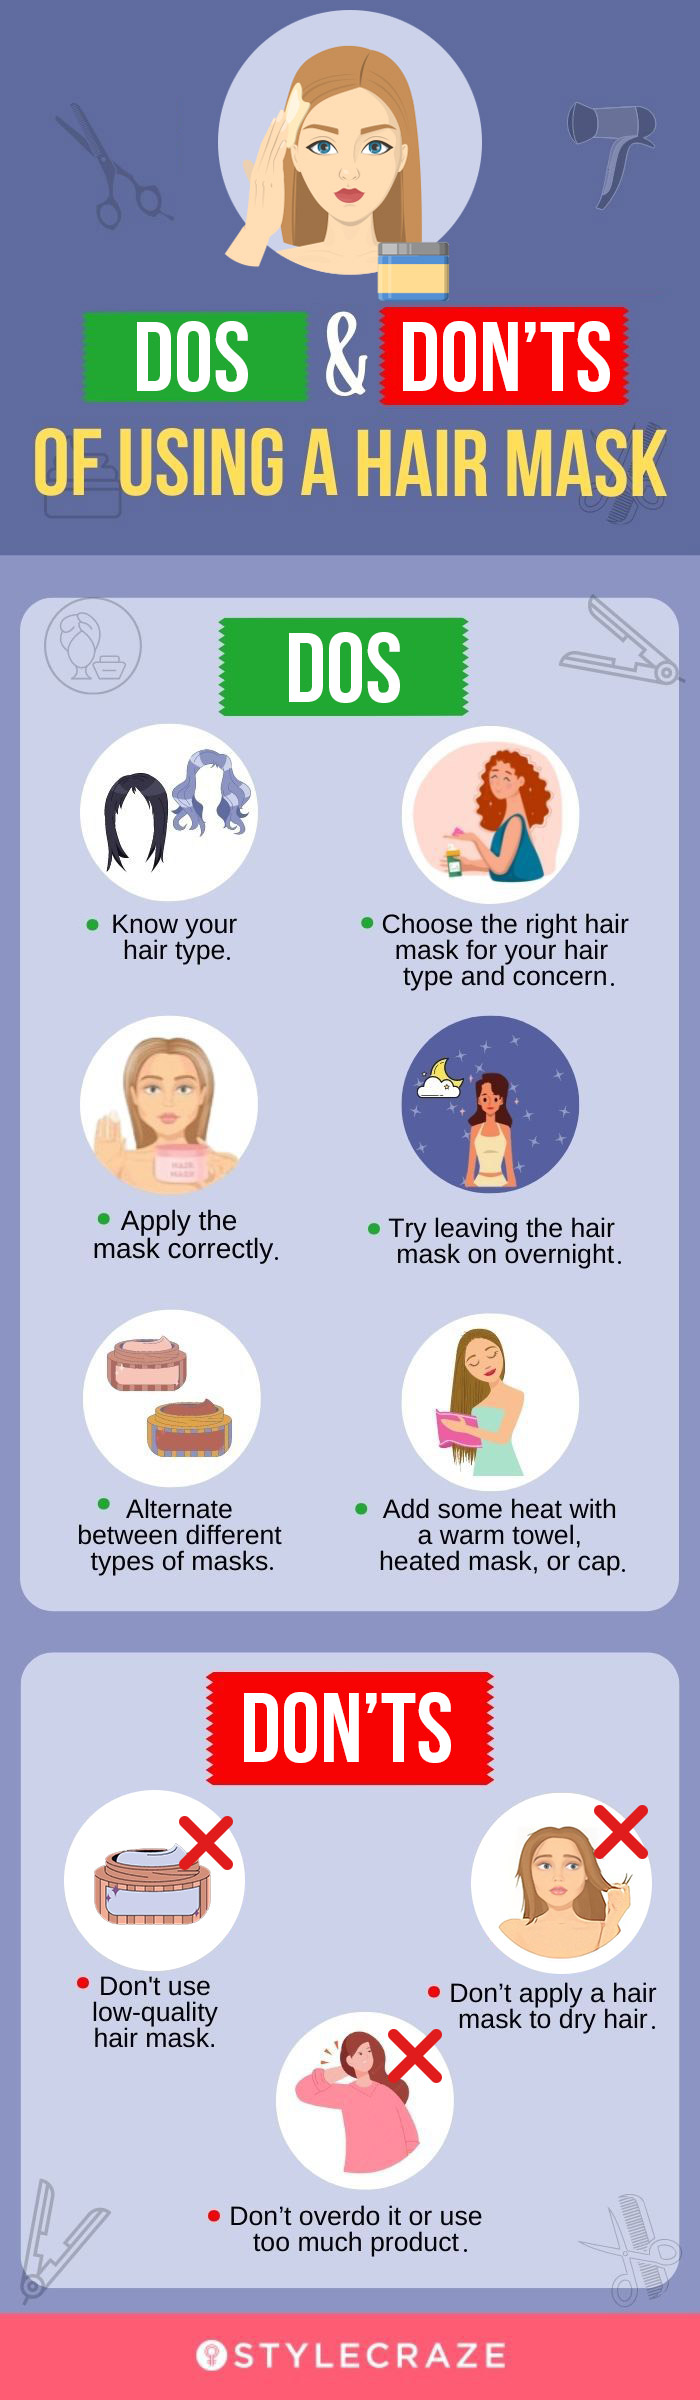 dos and don'ts of using a hair mask (infographic)